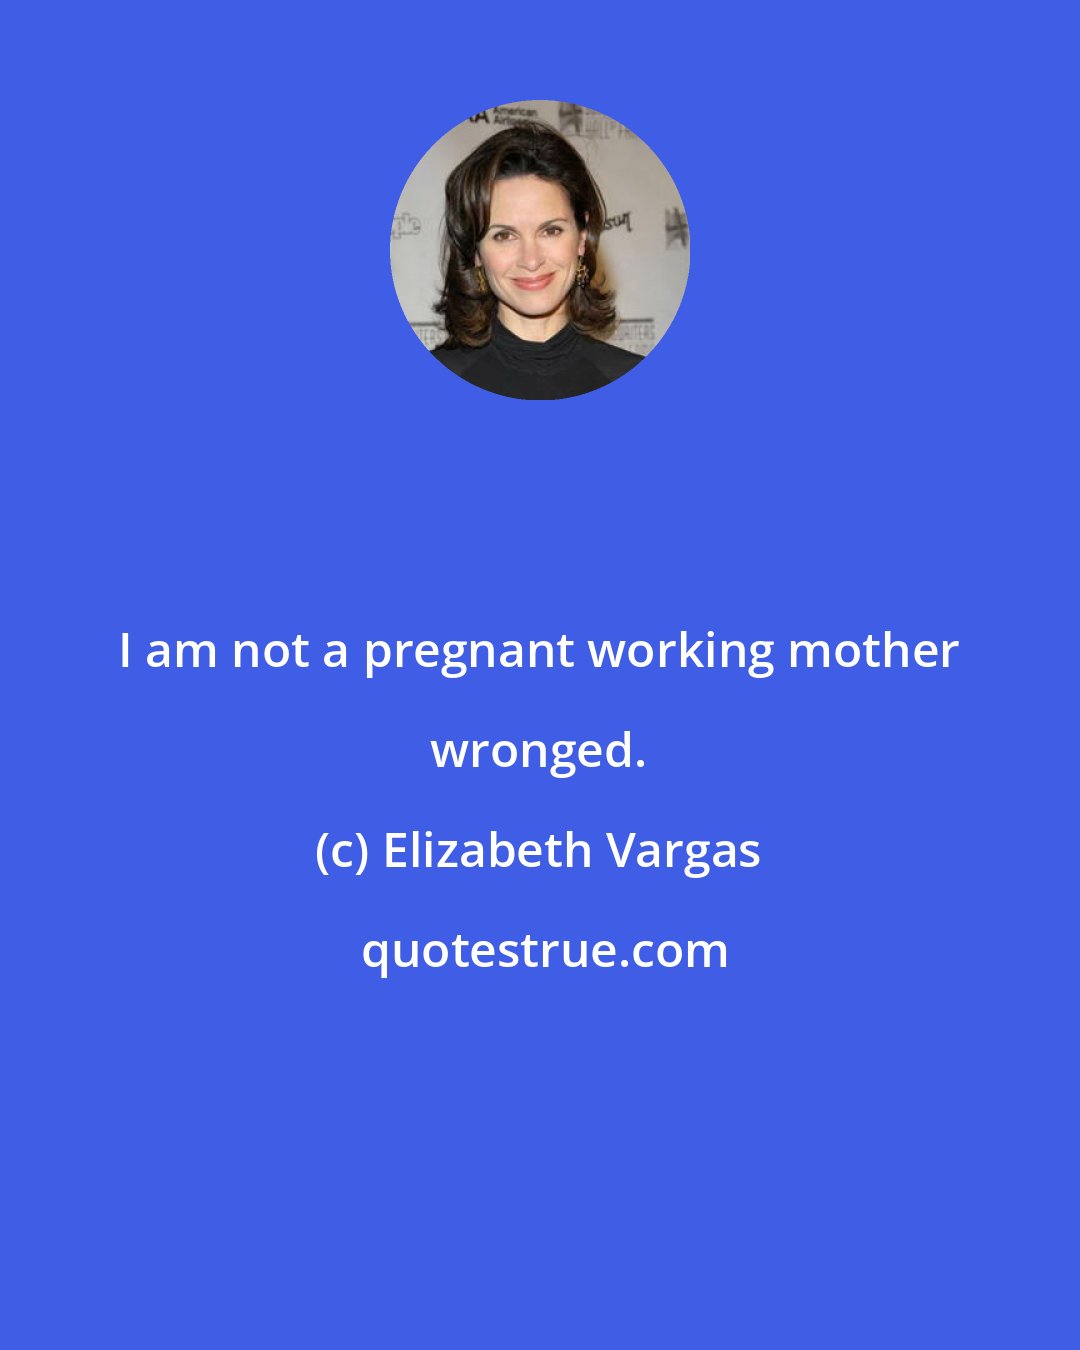 Elizabeth Vargas: I am not a pregnant working mother wronged.